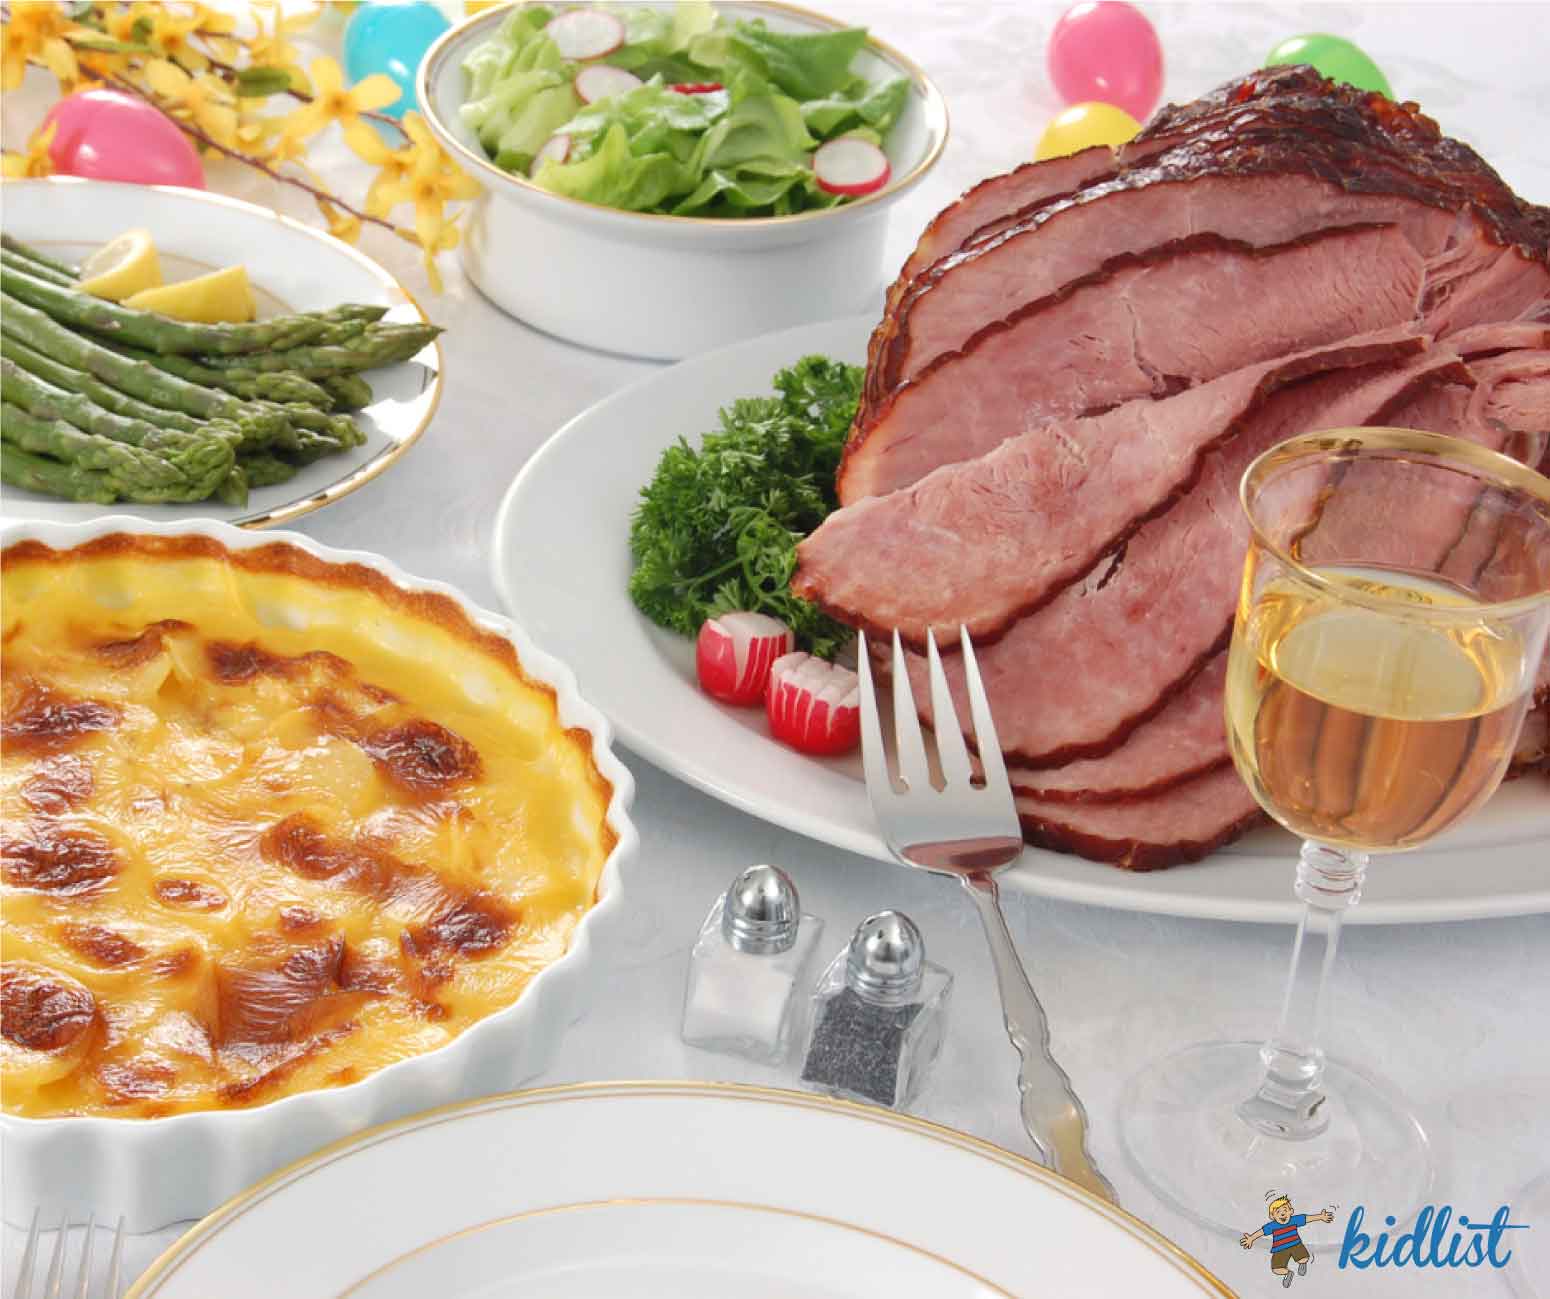 A traditional Easter dinner with ham and side dishes.